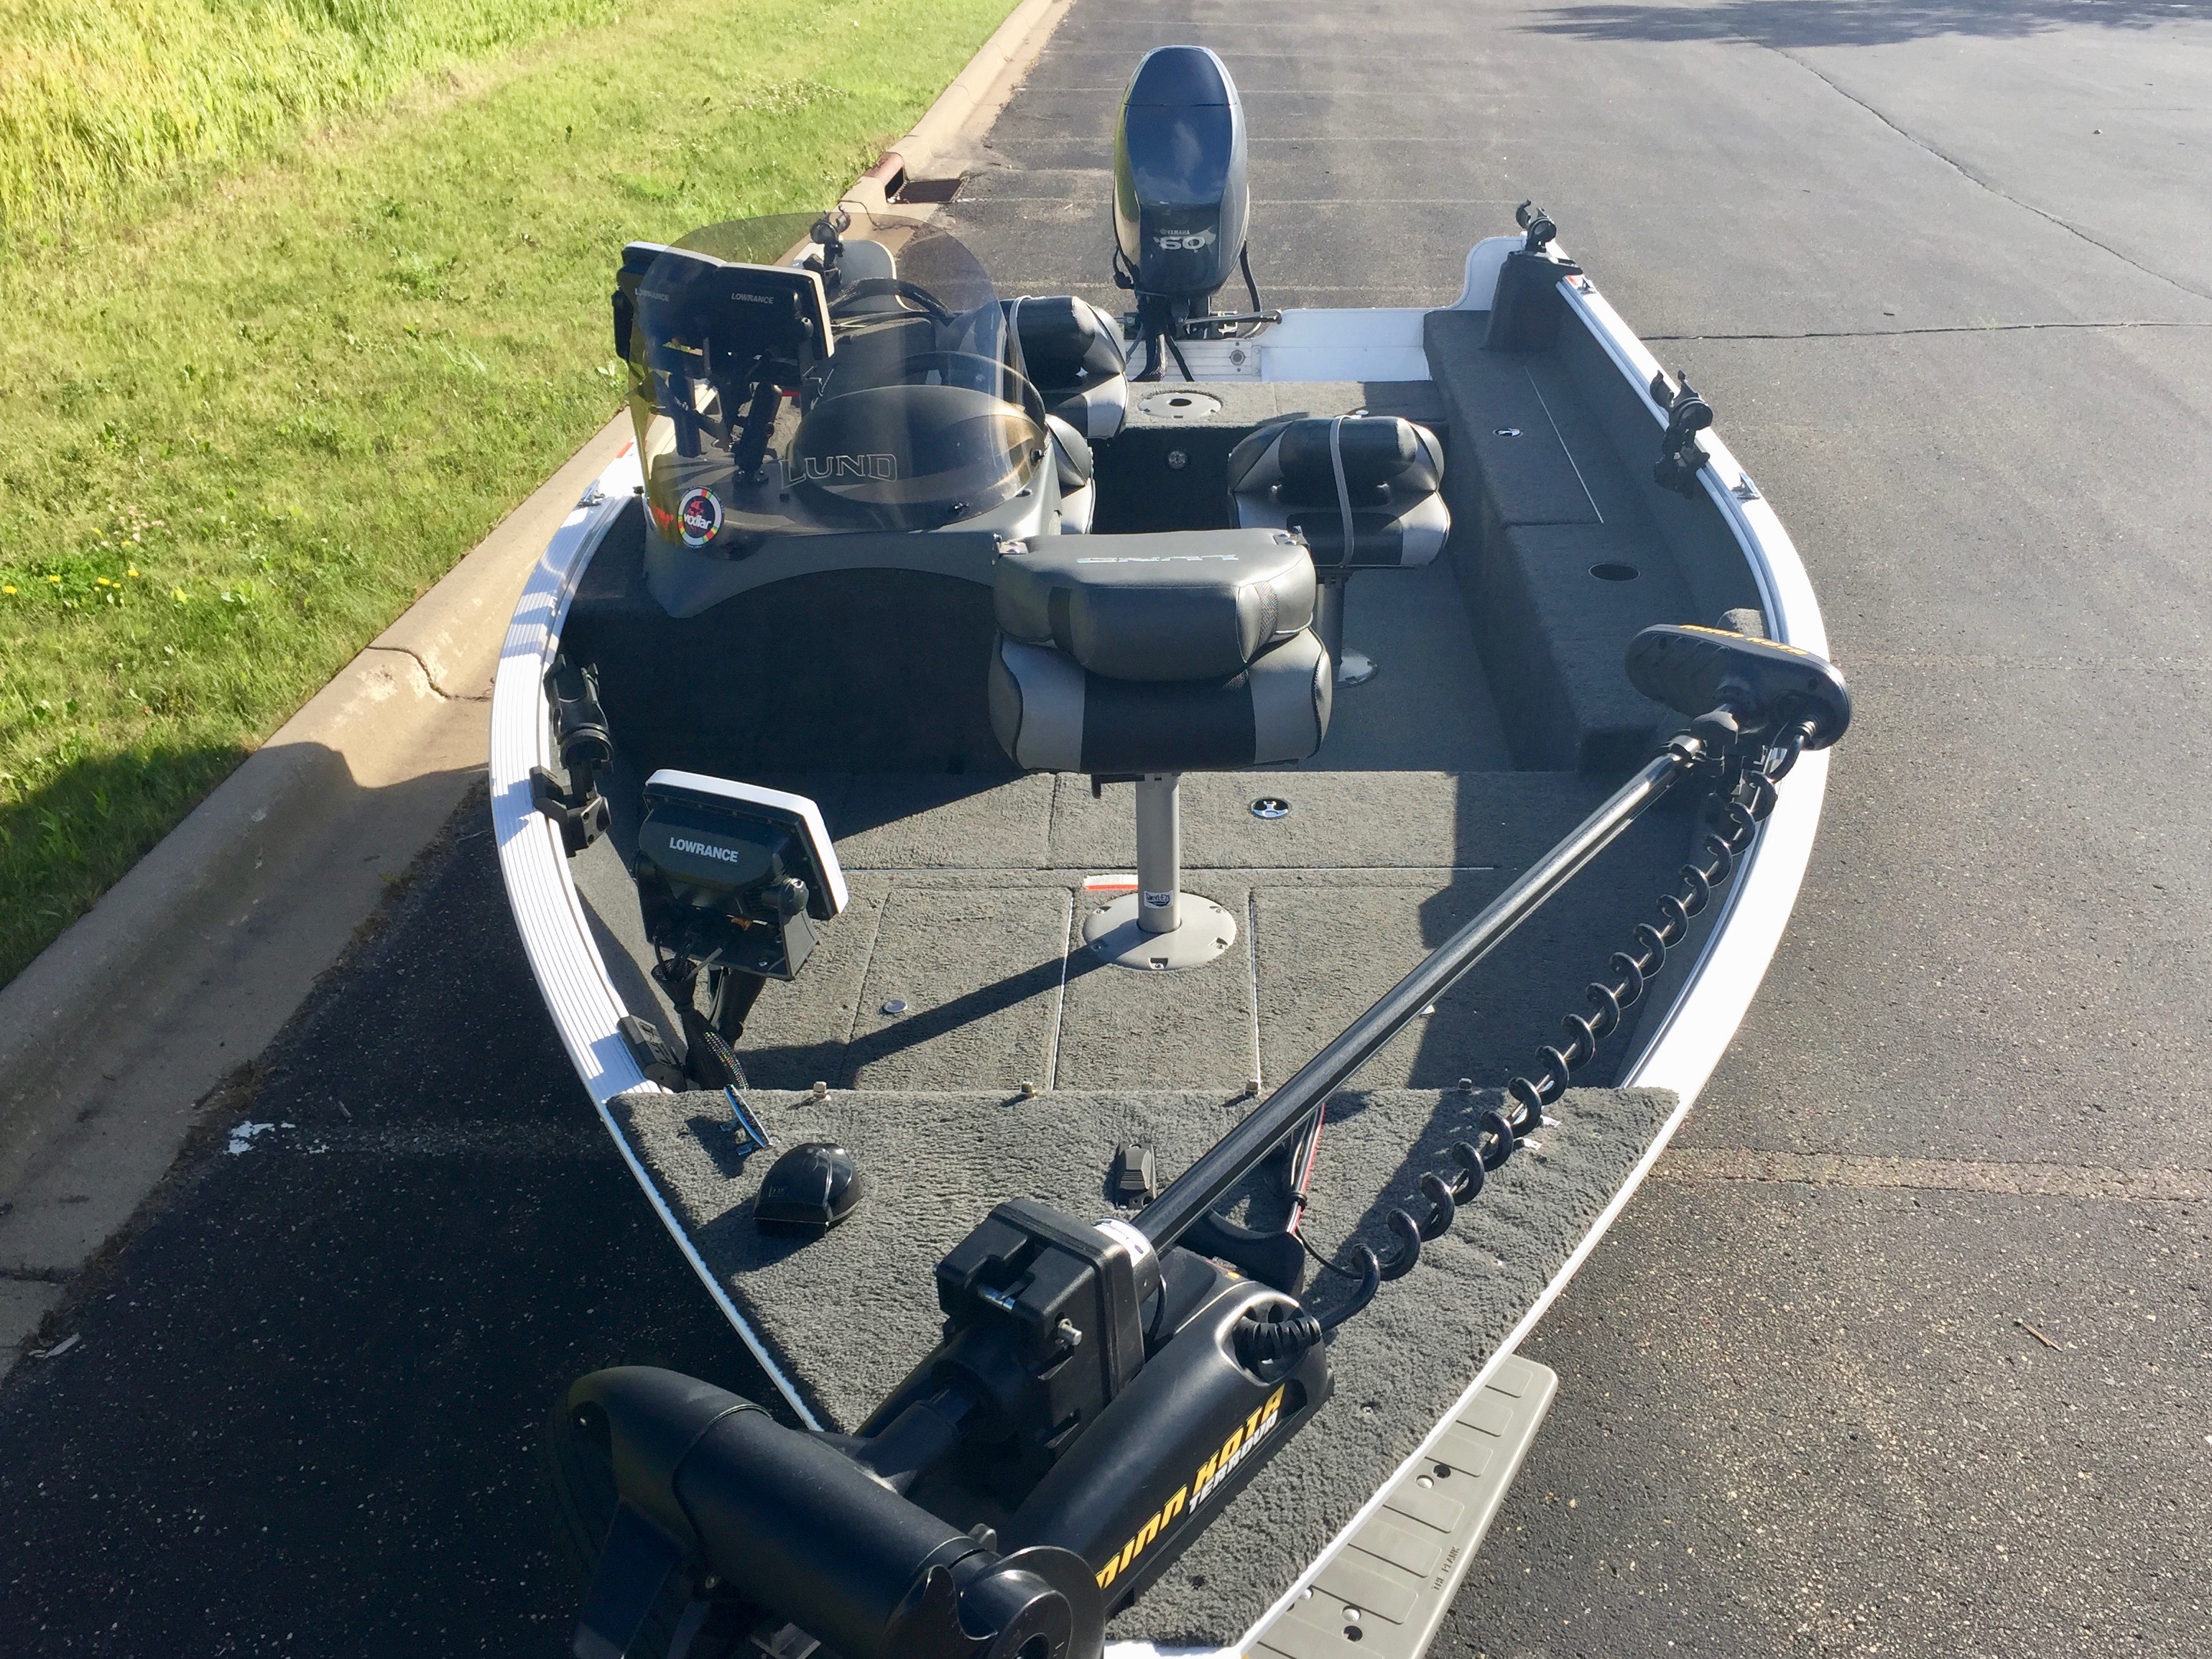 For Sale-2010 Lund Rebel 1625 XL - Boats for Sale - Lake Ontario United -  Lake Ontario's Largest Fishing & Hunting Community - New York and Ontario  Canada